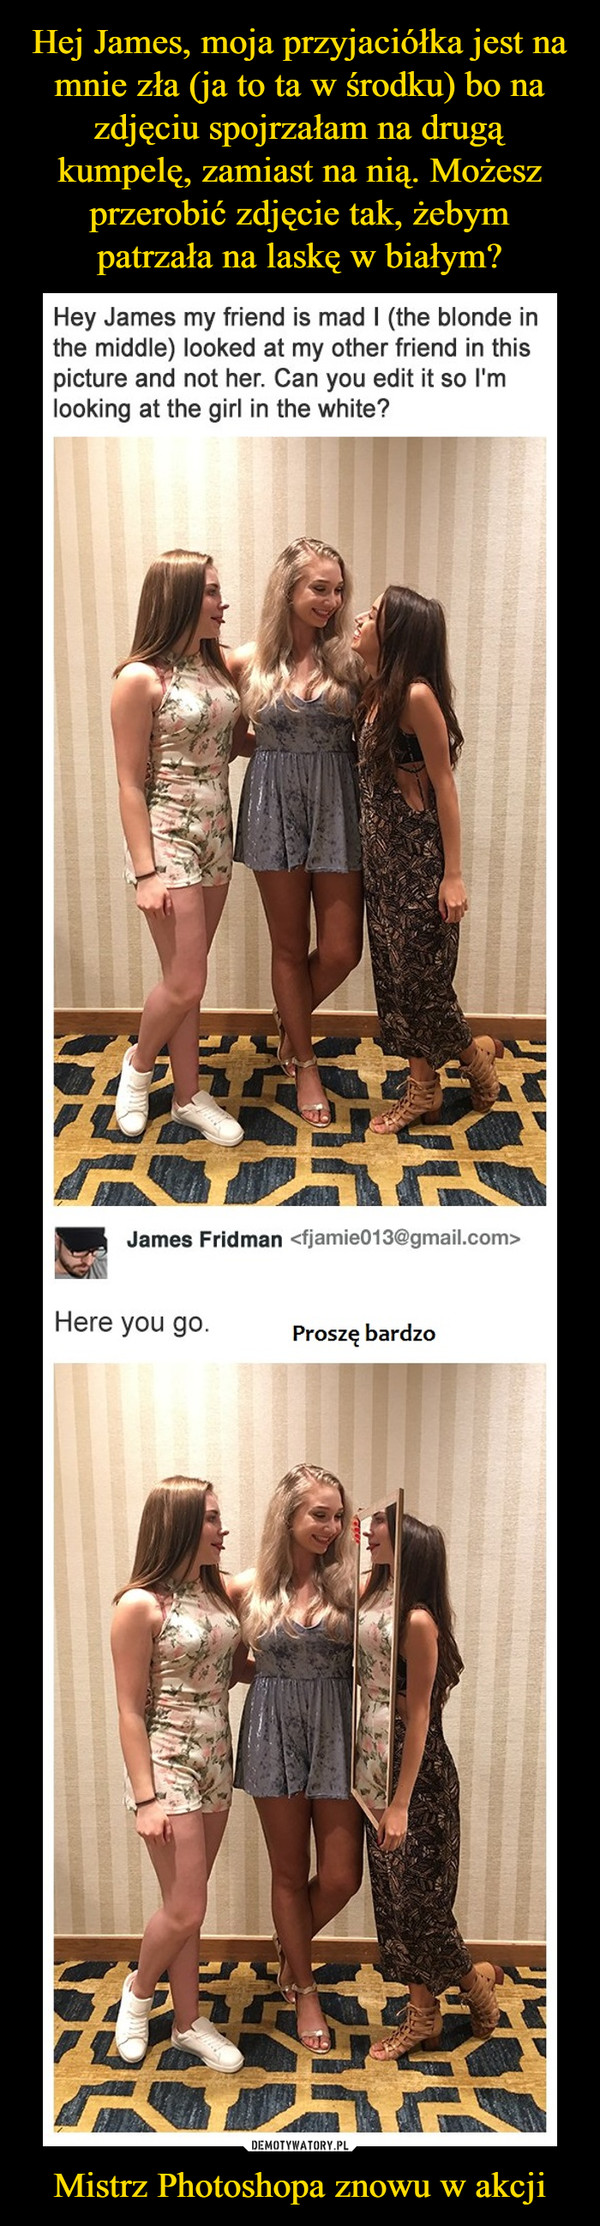 Mistrz Photoshopa znowu w akcji –  Hey James my friend is mad I (the blonde in the middle) looked at my other friend in this picture and not her. Can you edit it so I'm looking at the girl in the white? James FridmanHere you go. 